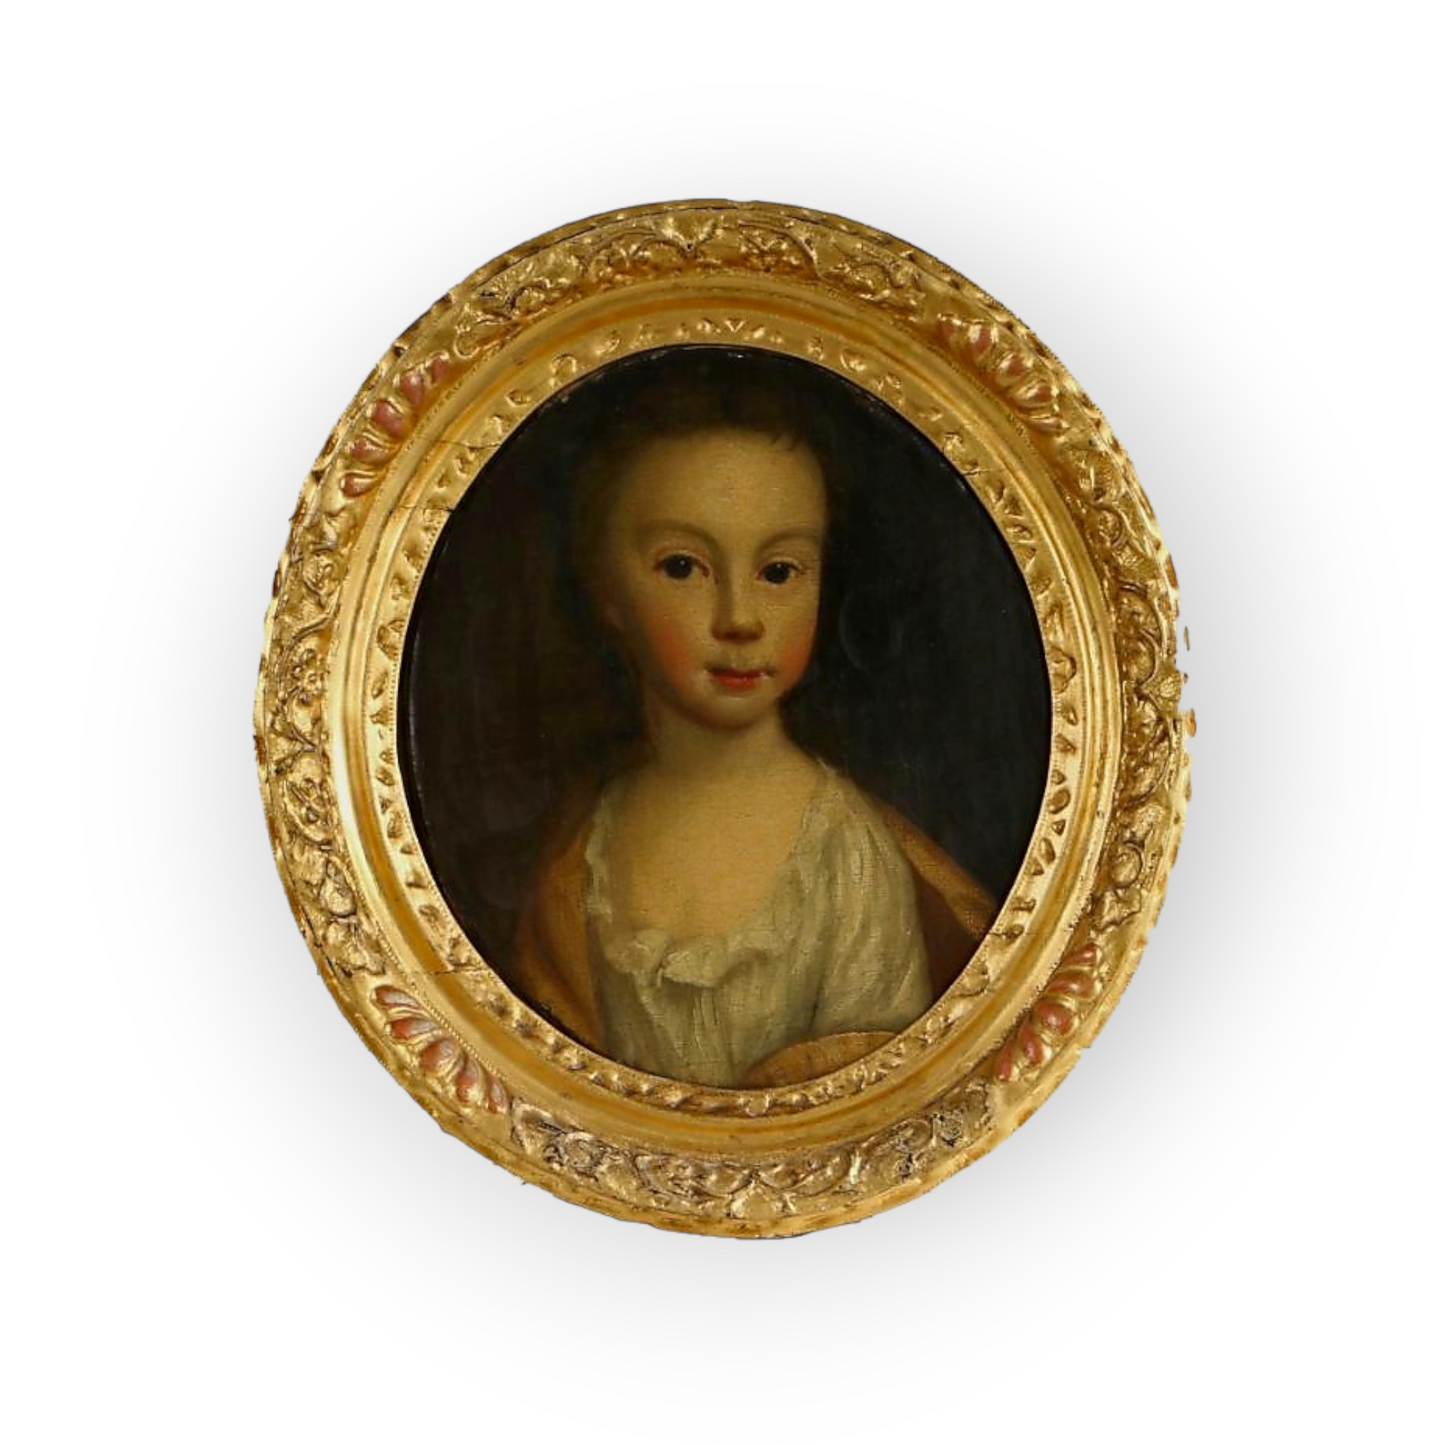 Follower of Sir Godfrey Kneller - A Mid 18th Century English School Antique Oil on Canvas Portrait of a Young Child